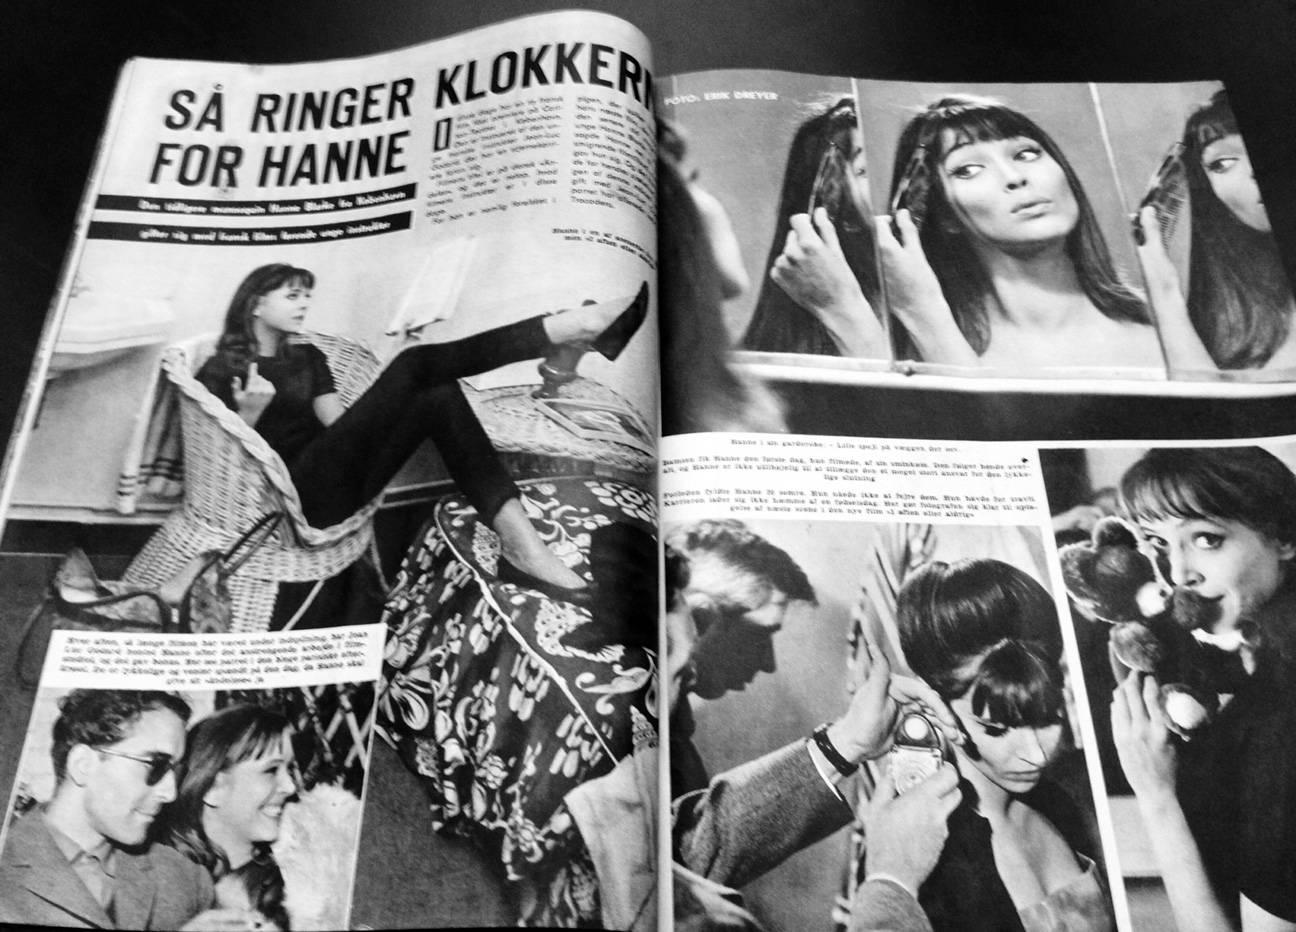 Jean-Luc Godard, Anna Karina 1960:
Vintage original 1960 Se Og Hør magazine featuring a fantastic Jean Luc Godard/Anna Karina cover that would look very cool framed.

Full magazine. 8 x 10 inches. Staple bound. Approximately 40 pages.
Some minor